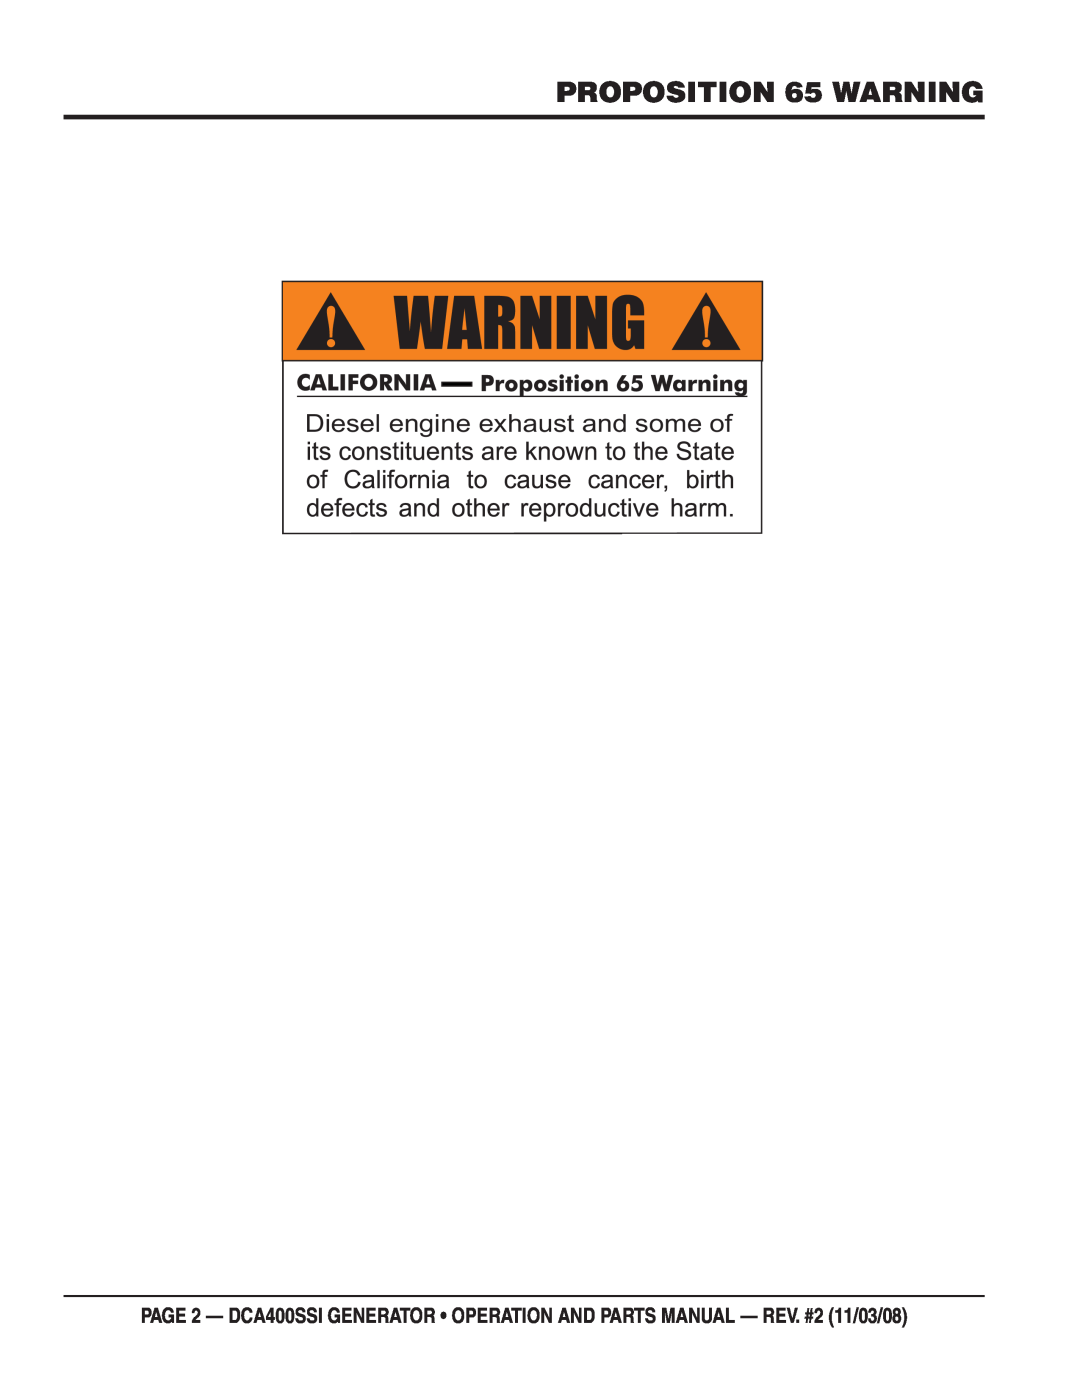 Multiquip DCA400SSI manual PROPOSITION 65 WARNING, Diesel engine exhaust and some of 